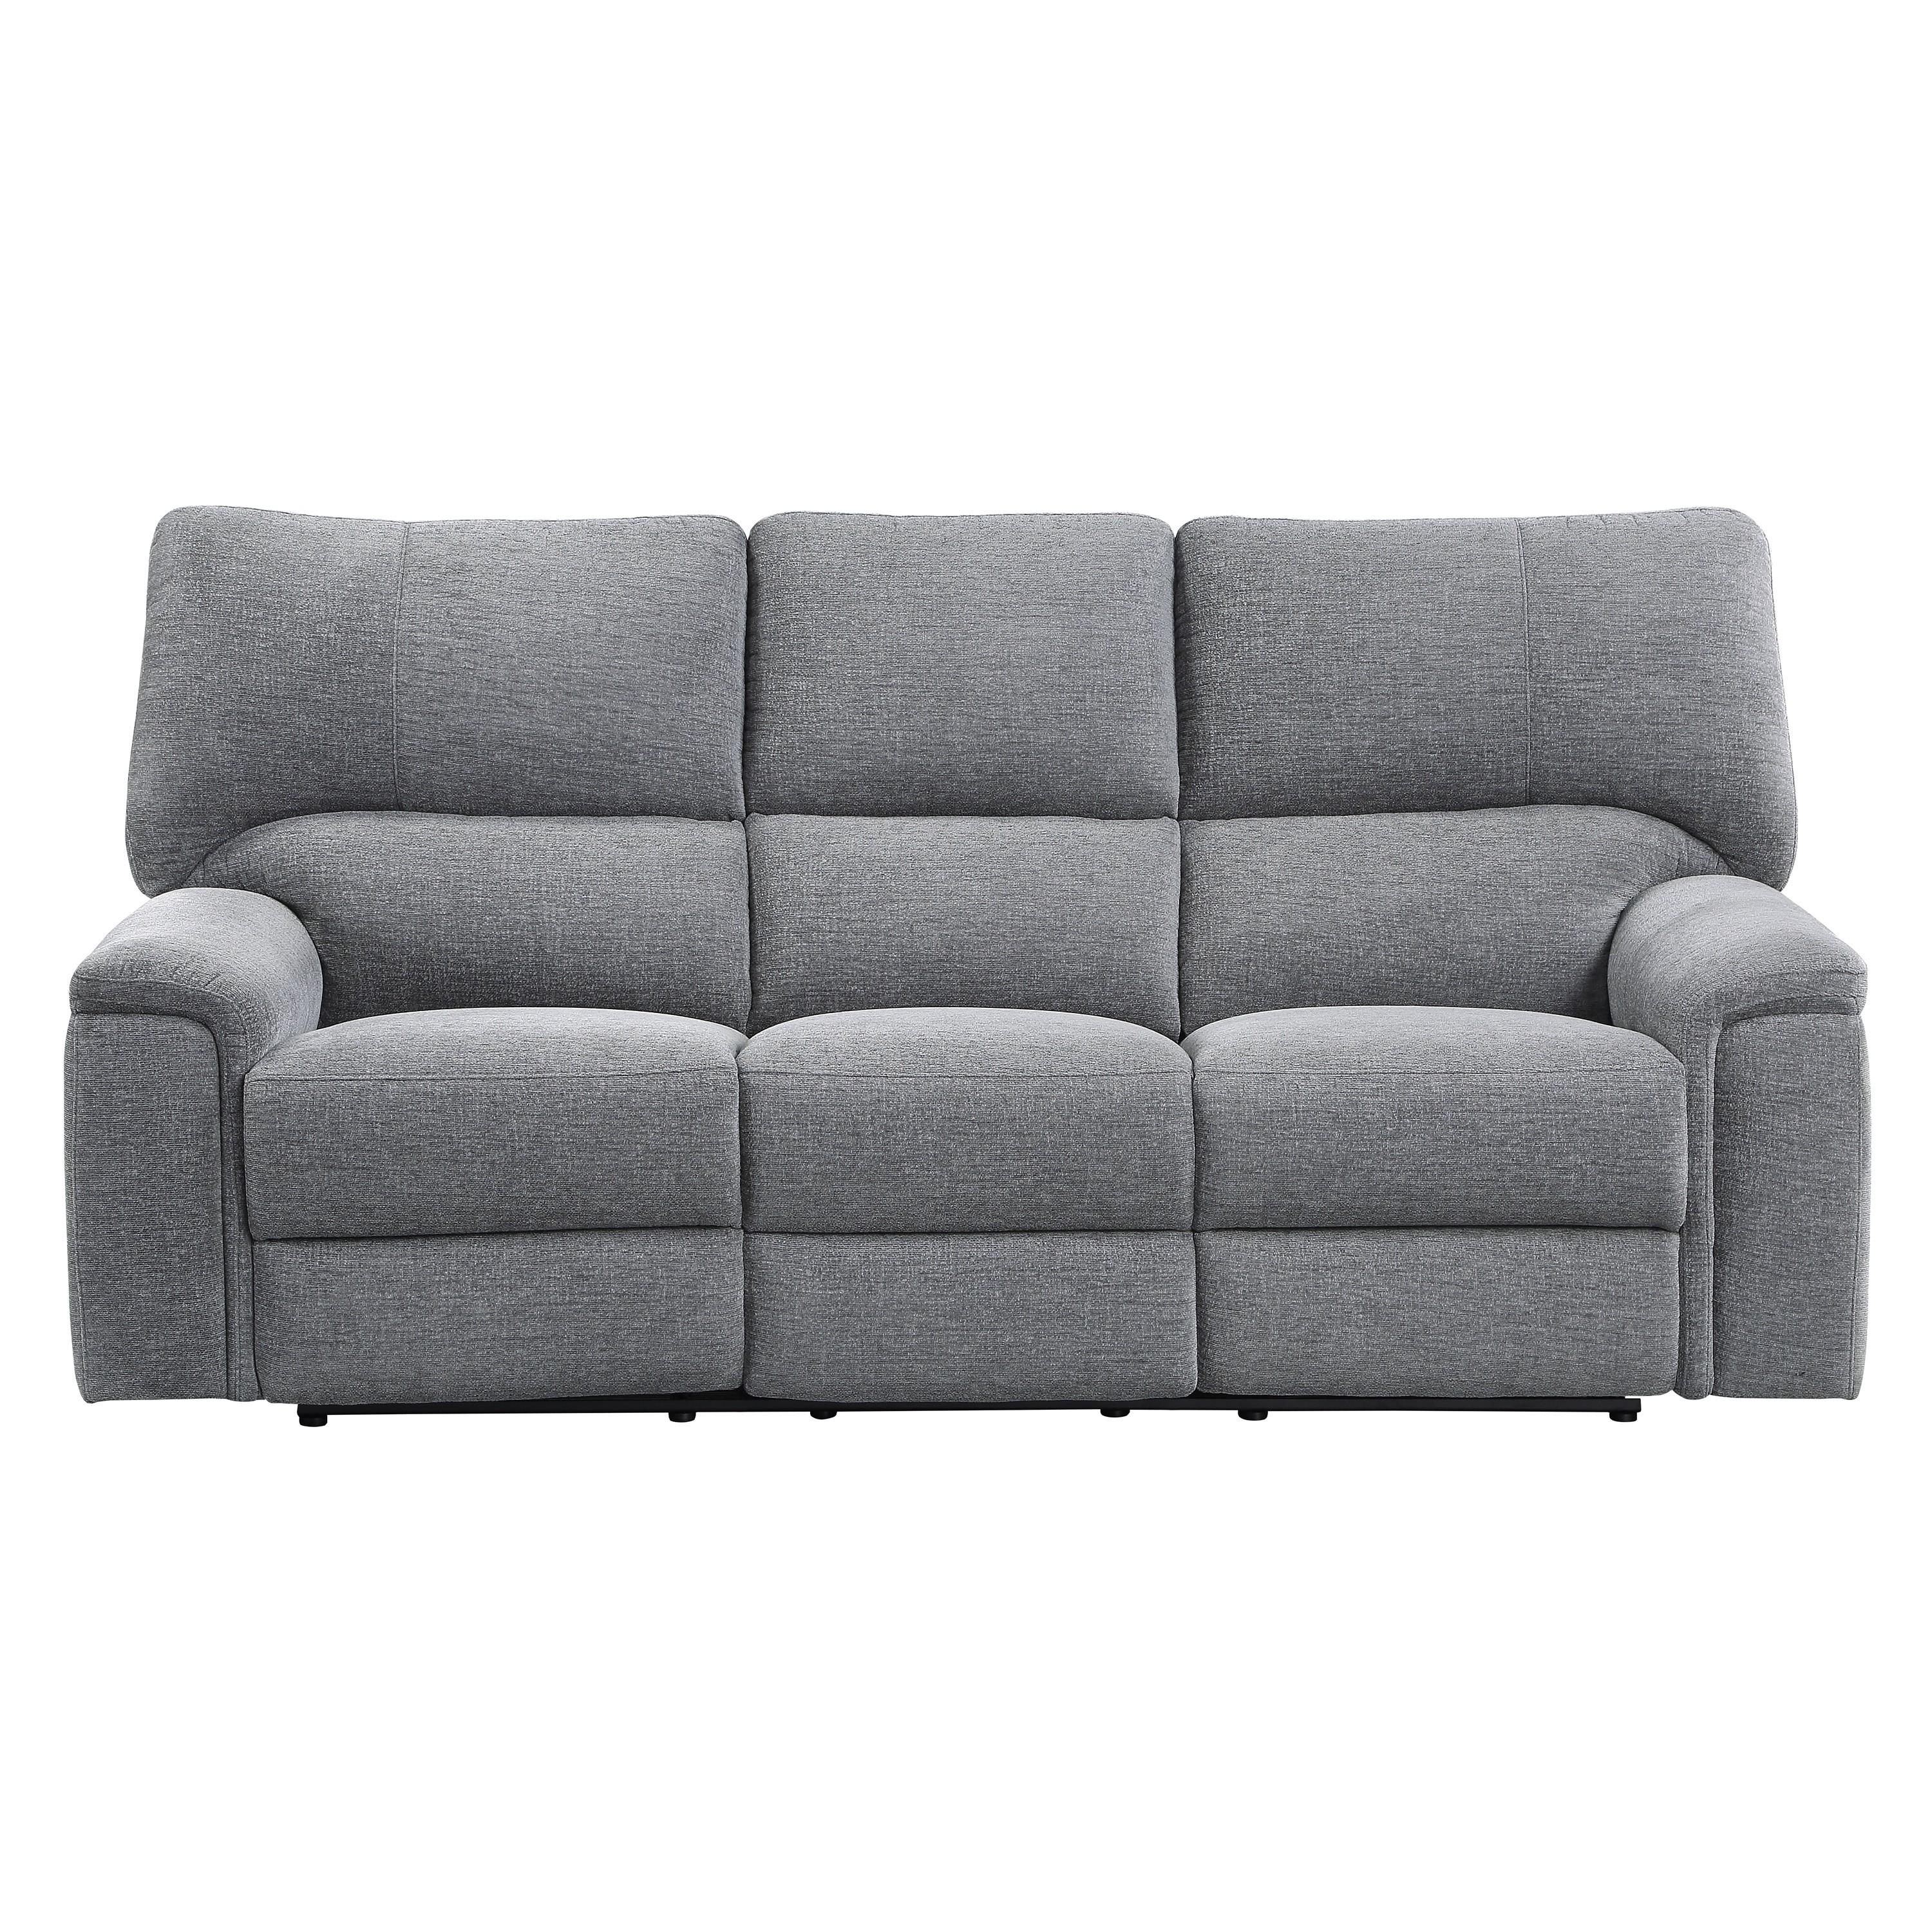 Transitional Reclining Sofa 9413CC-3 Dickinson 9413CC-3 in Charcoal Chenille